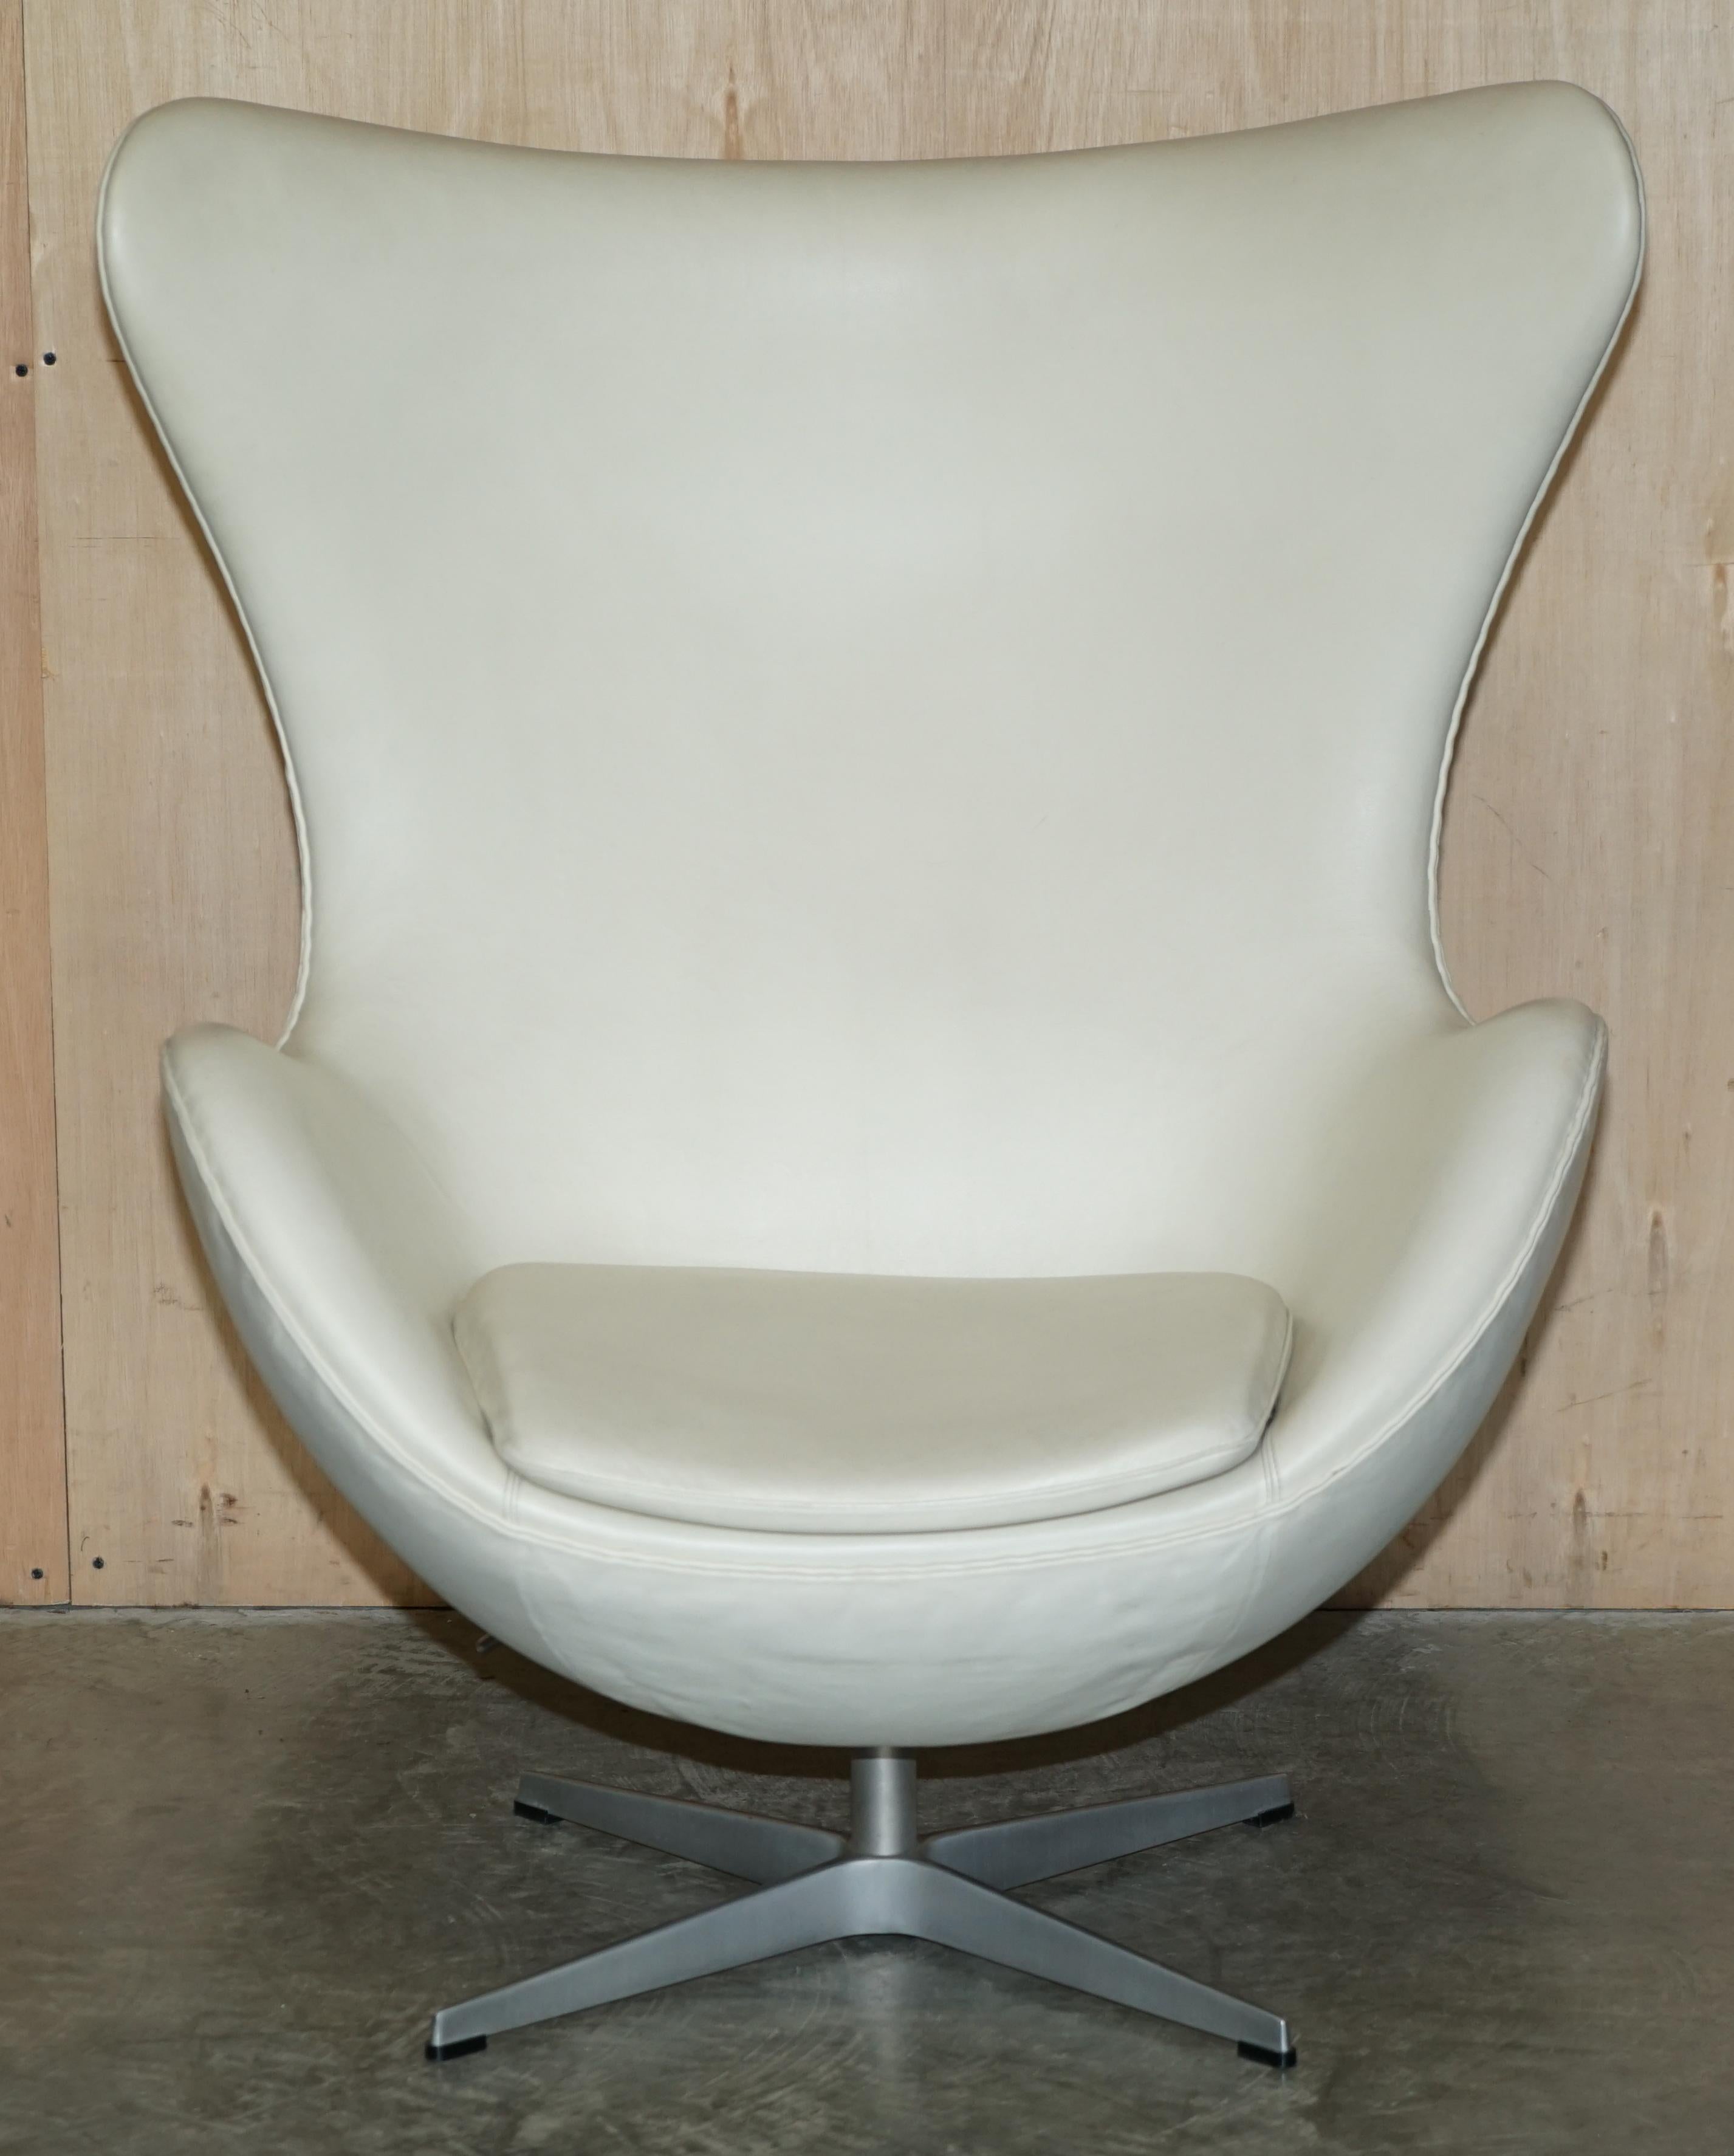 20th Century Stamped Fritz Hansen Cream Leather Egg Chair & Ottoman Footstool For Sale